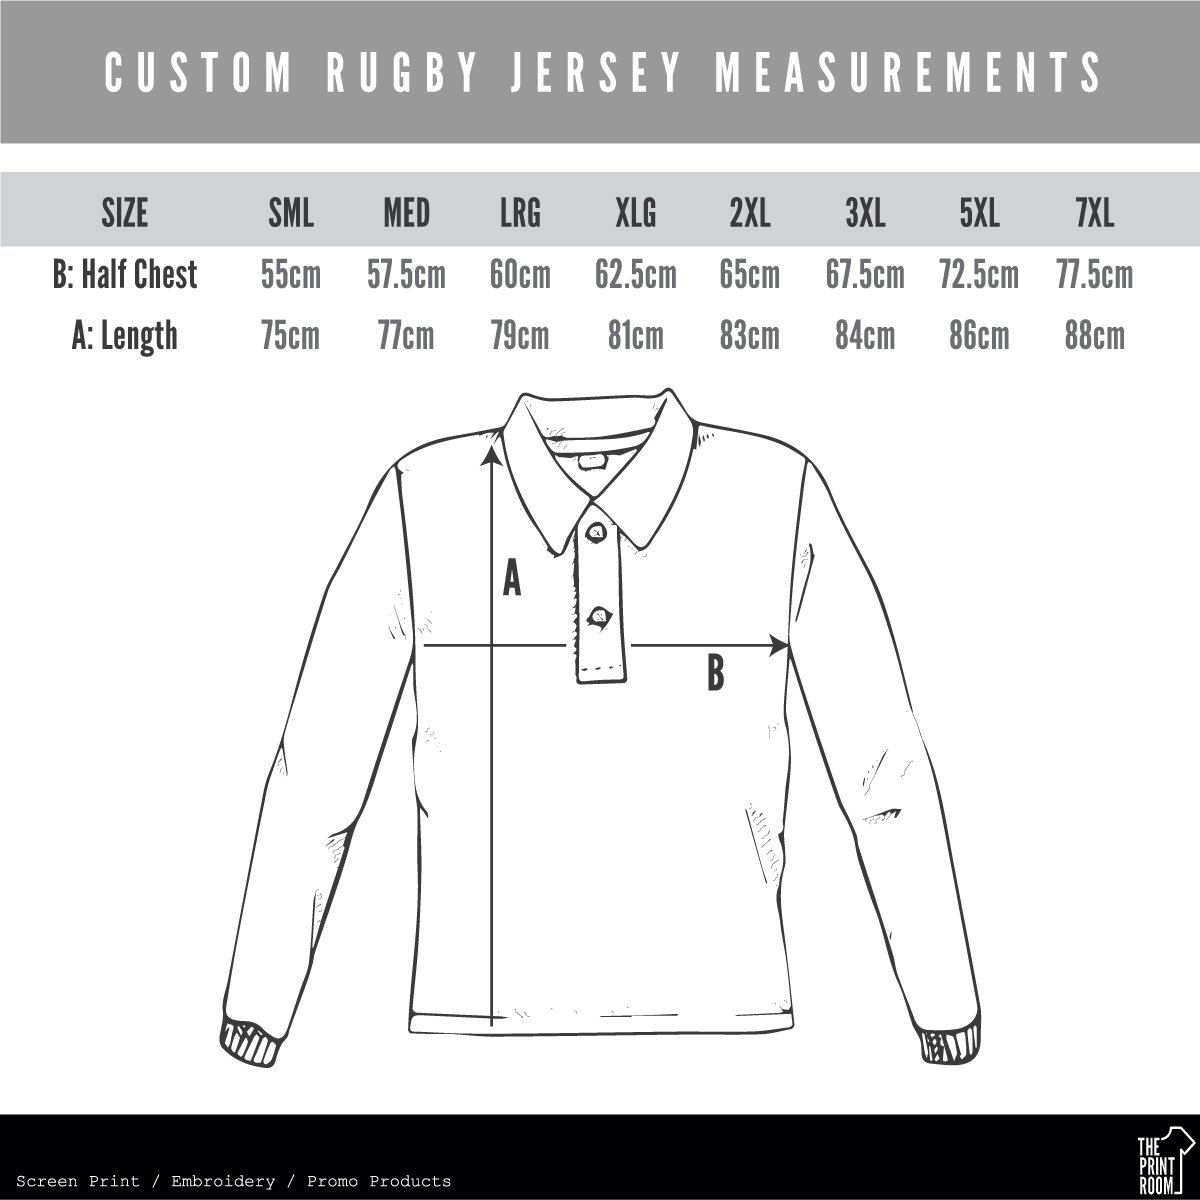 Rugby Jersey - Custom Sewn Rugby Jersey - Leavers Gear NZ 2021